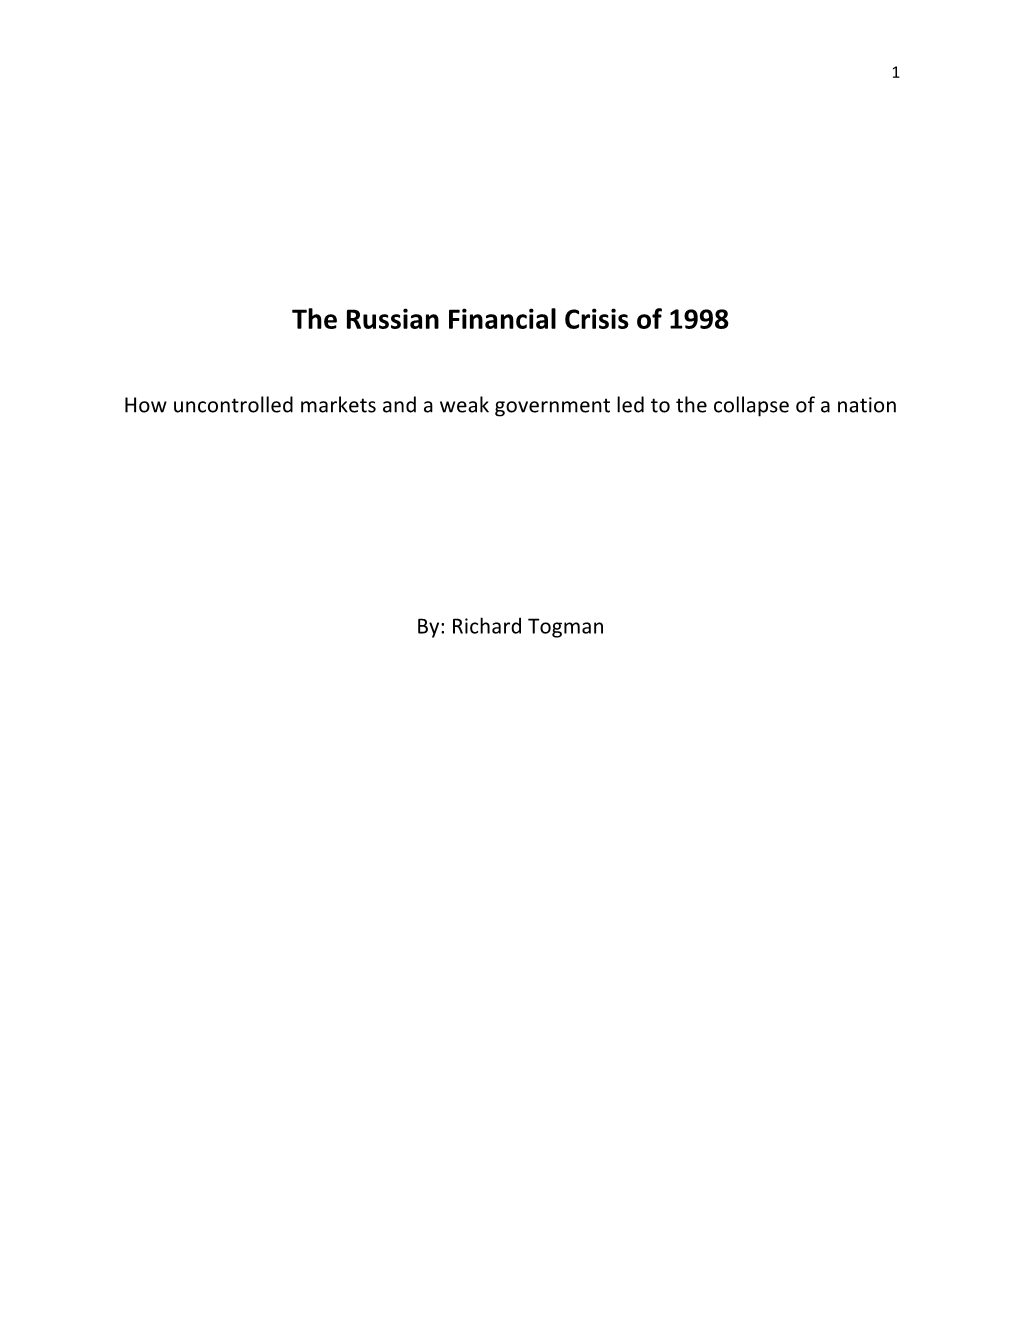 The Russian Financial Crisis of 1998